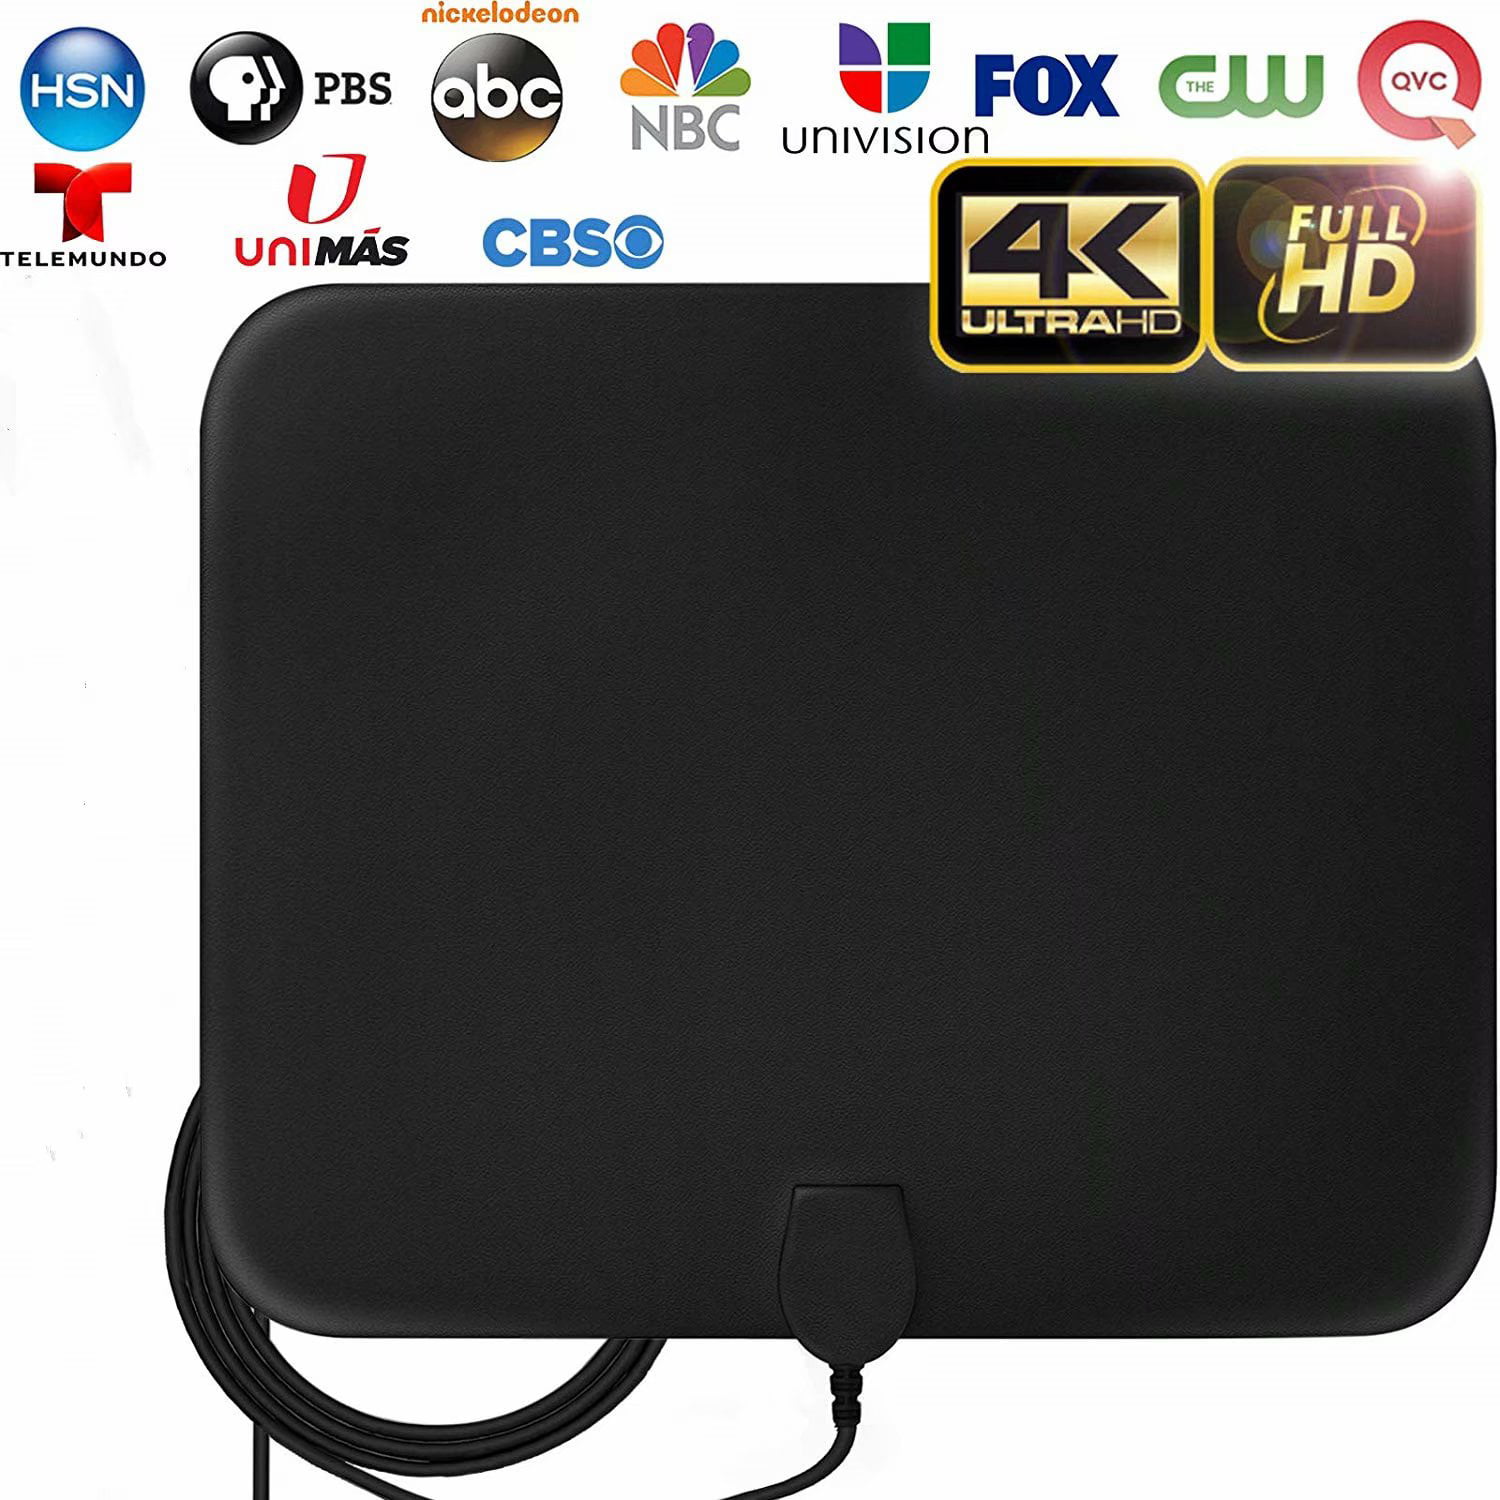 Amplified HD Antenna Free Channels Cut Cable Live TV OTA Wave Antenna HDTV NIYN 